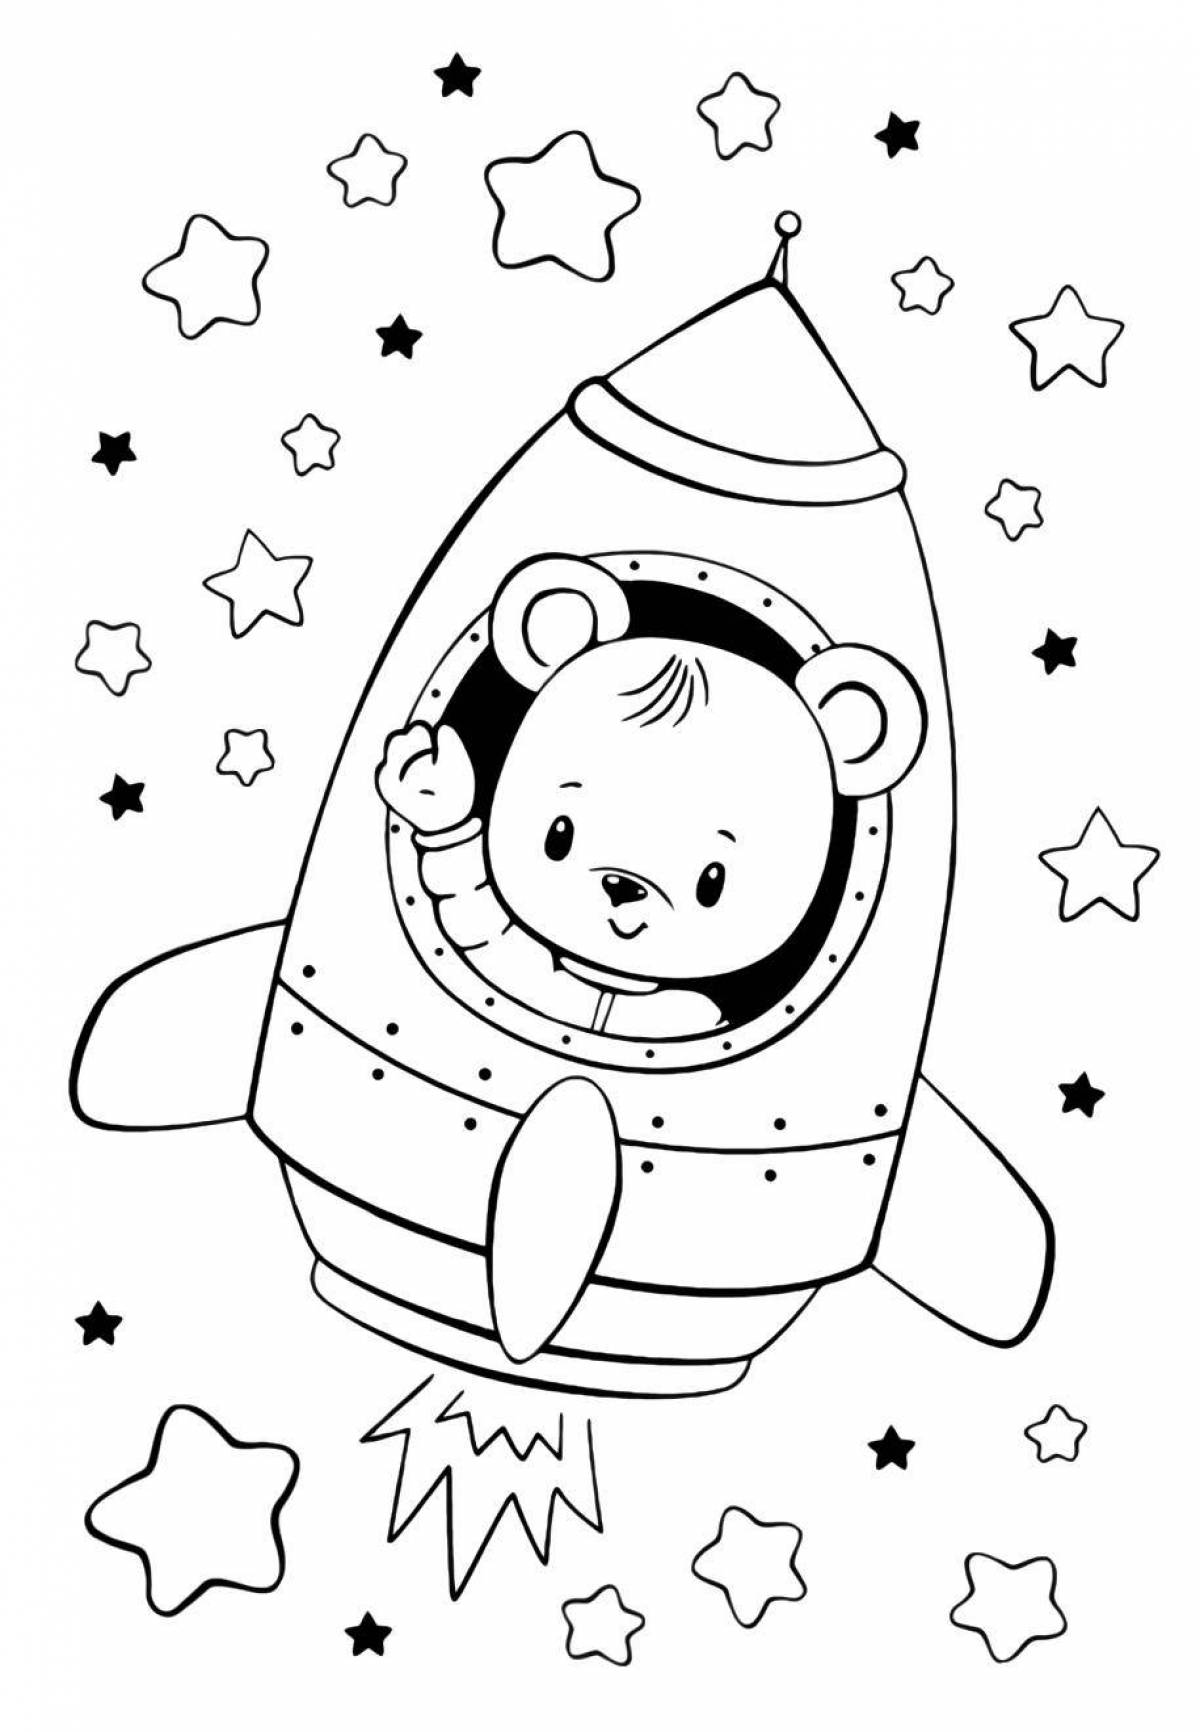 Playful rocket coloring book for 4-5 year olds